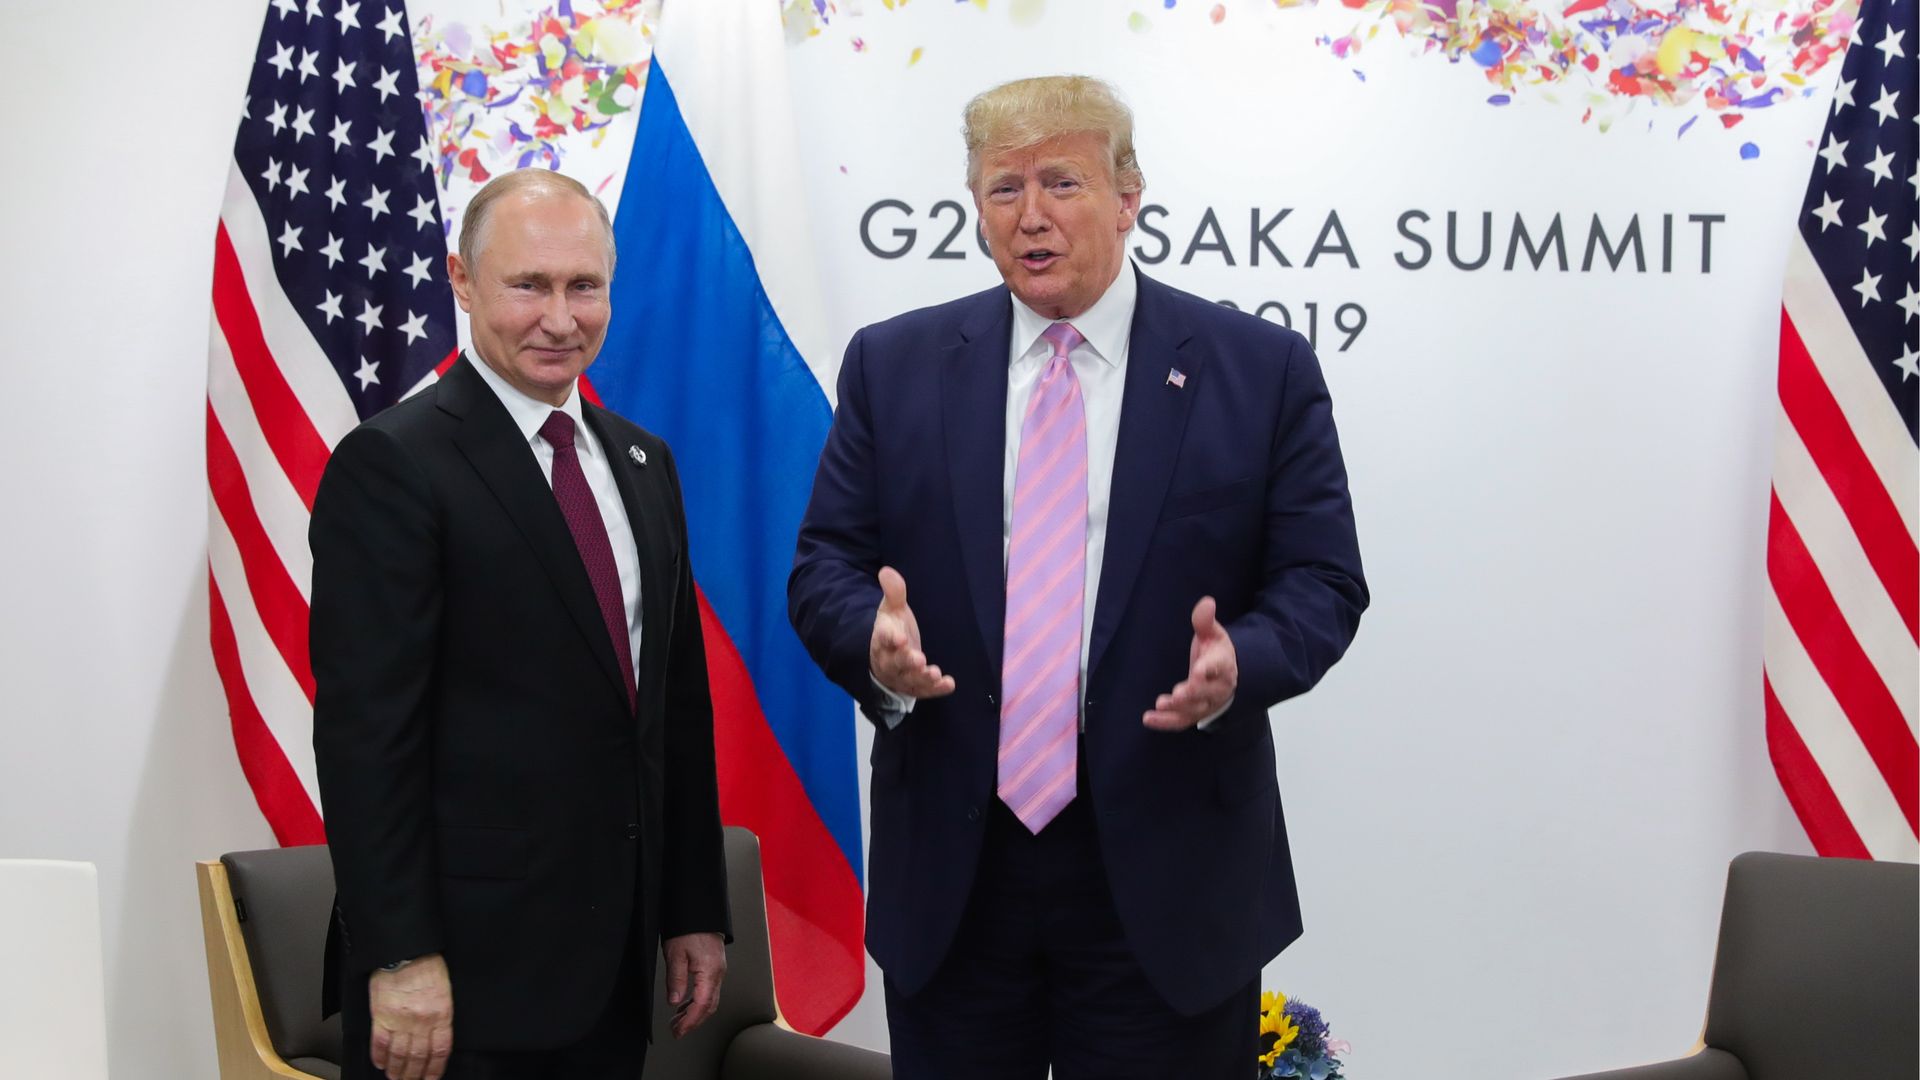 Photo of Donald Trump and Vladimir Putin standing next to each other